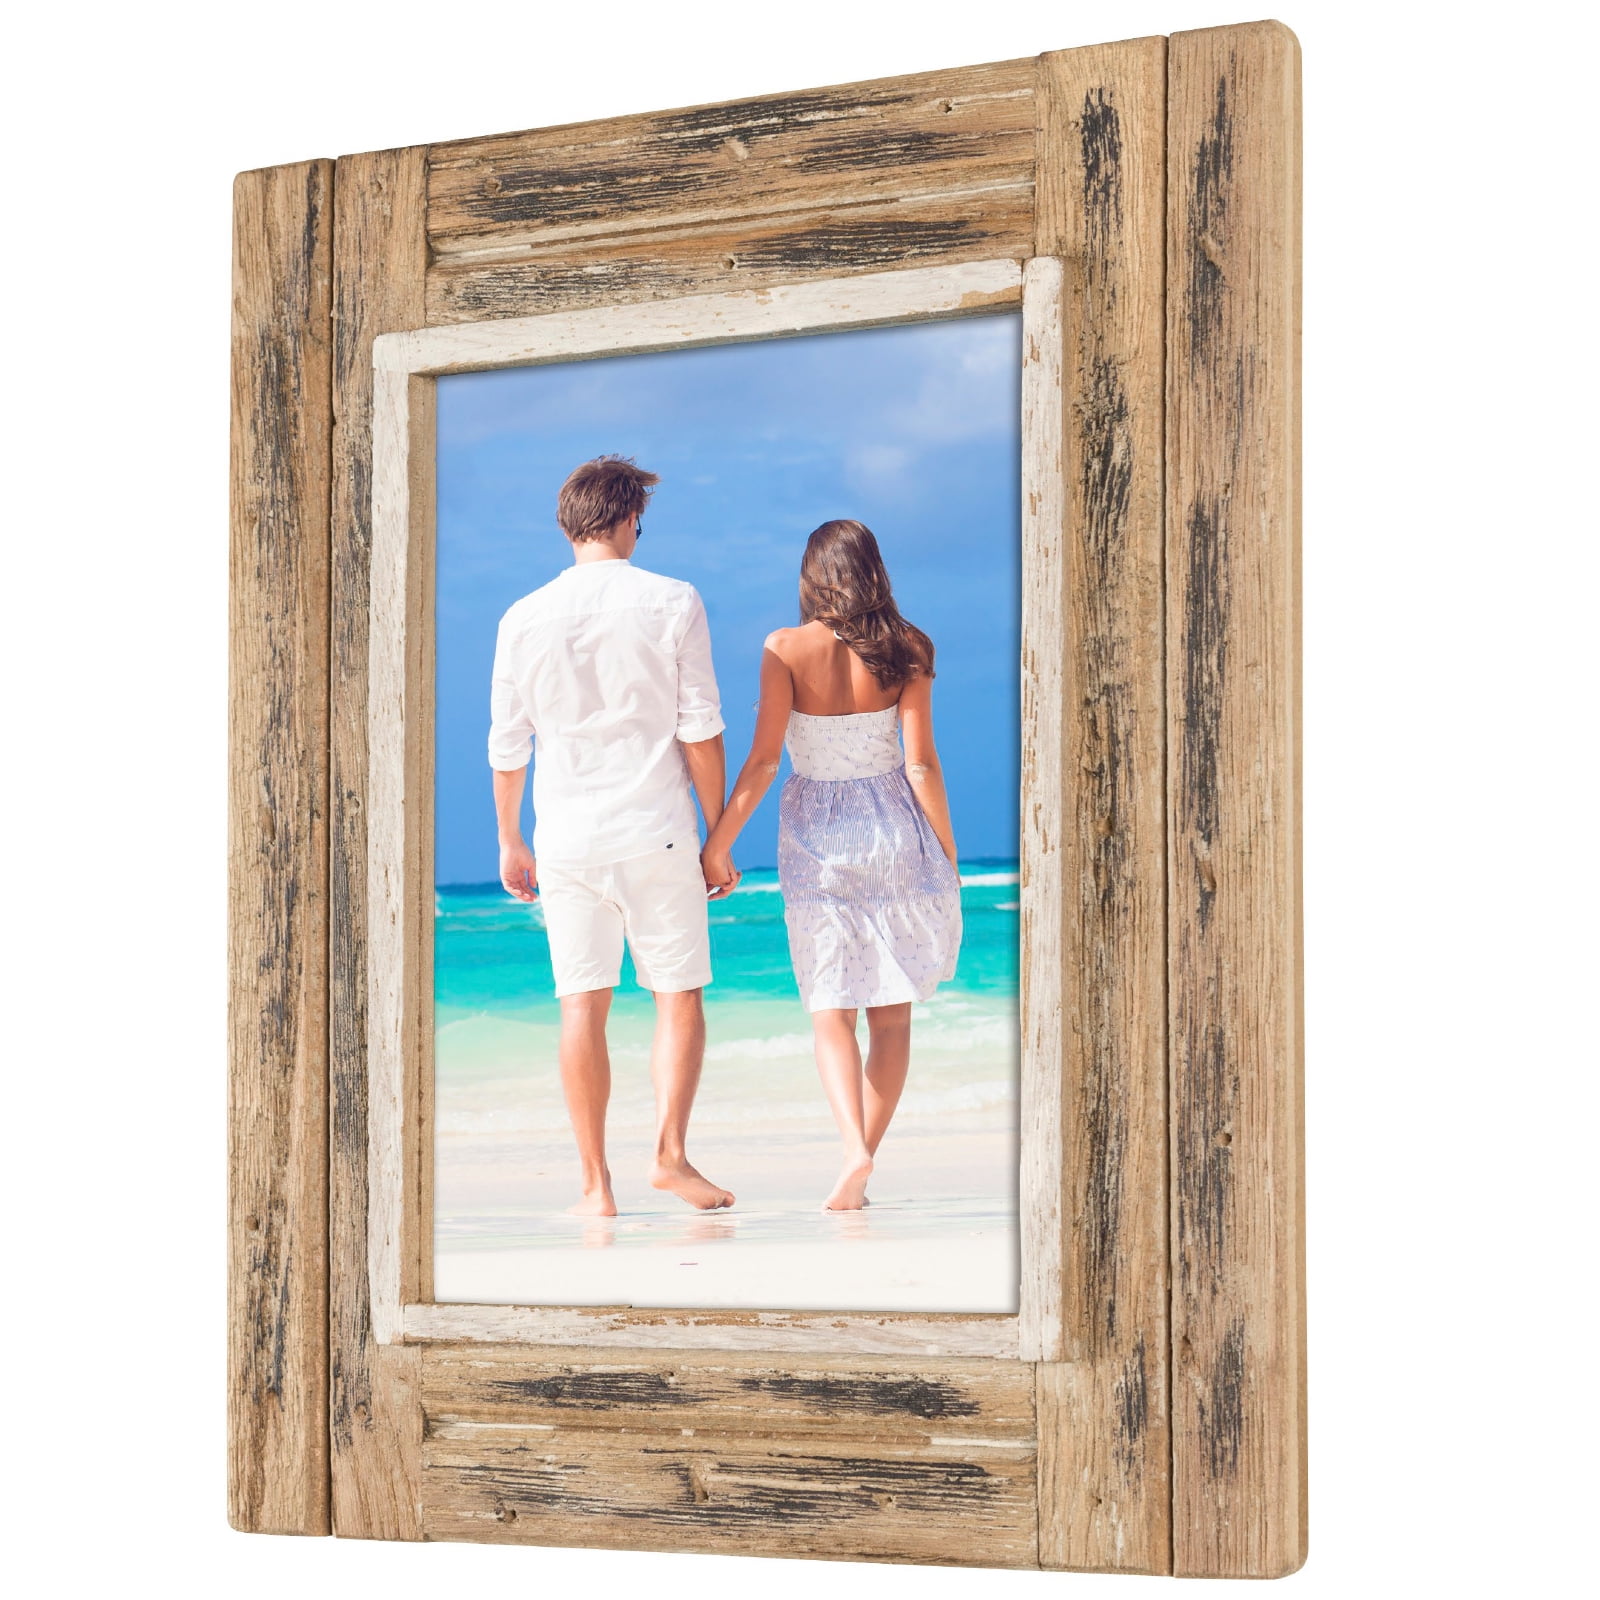 Rustic Wooden Picture Frame Shabby Chic Wall Hanging Frame fits 5x7 Photo 